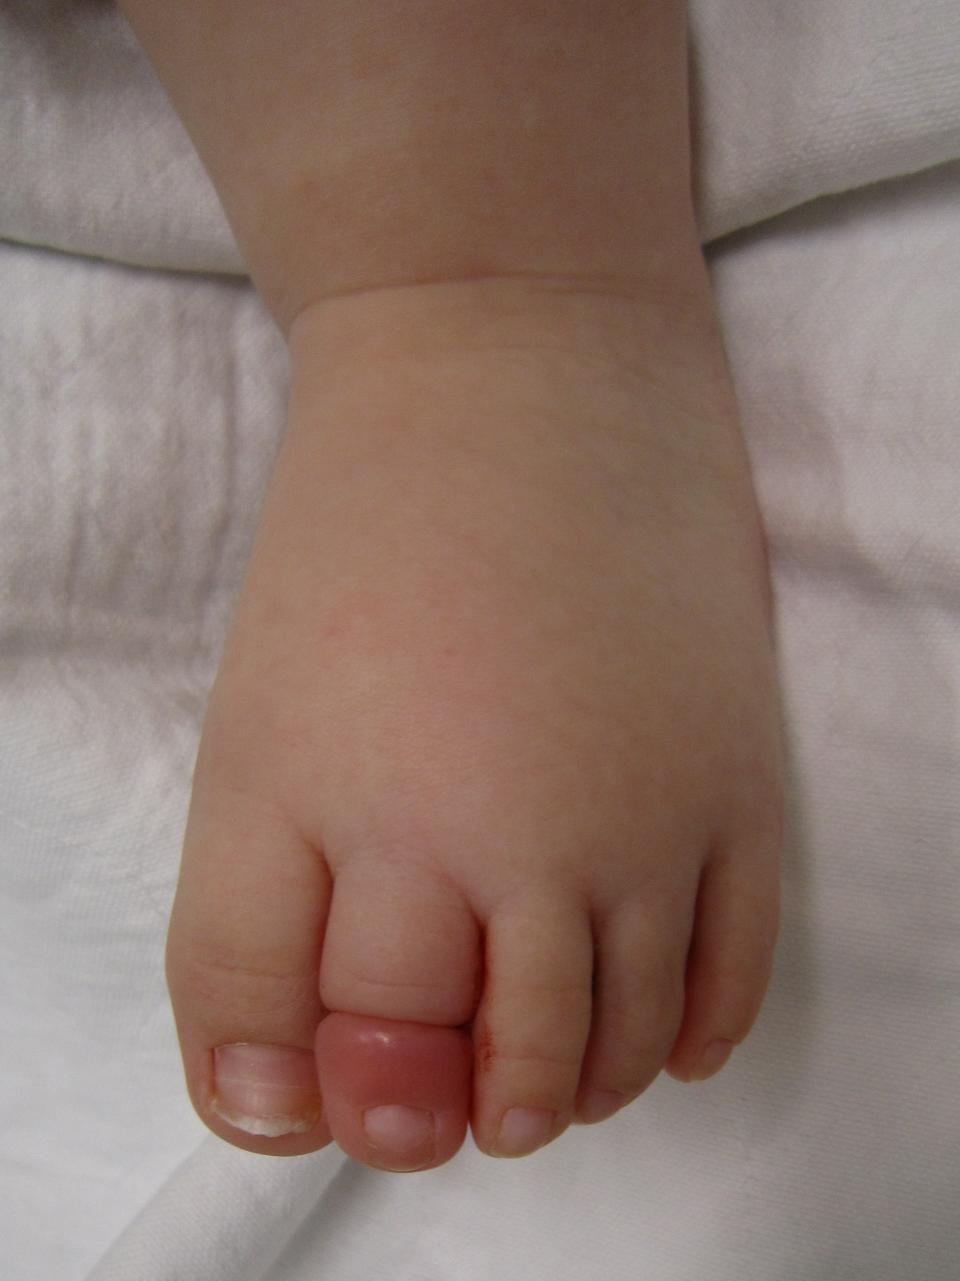 Close-up of a baby's toe resting on a white surface, toes gently curled. There is a hair tightly wrapped around one toe that is red.